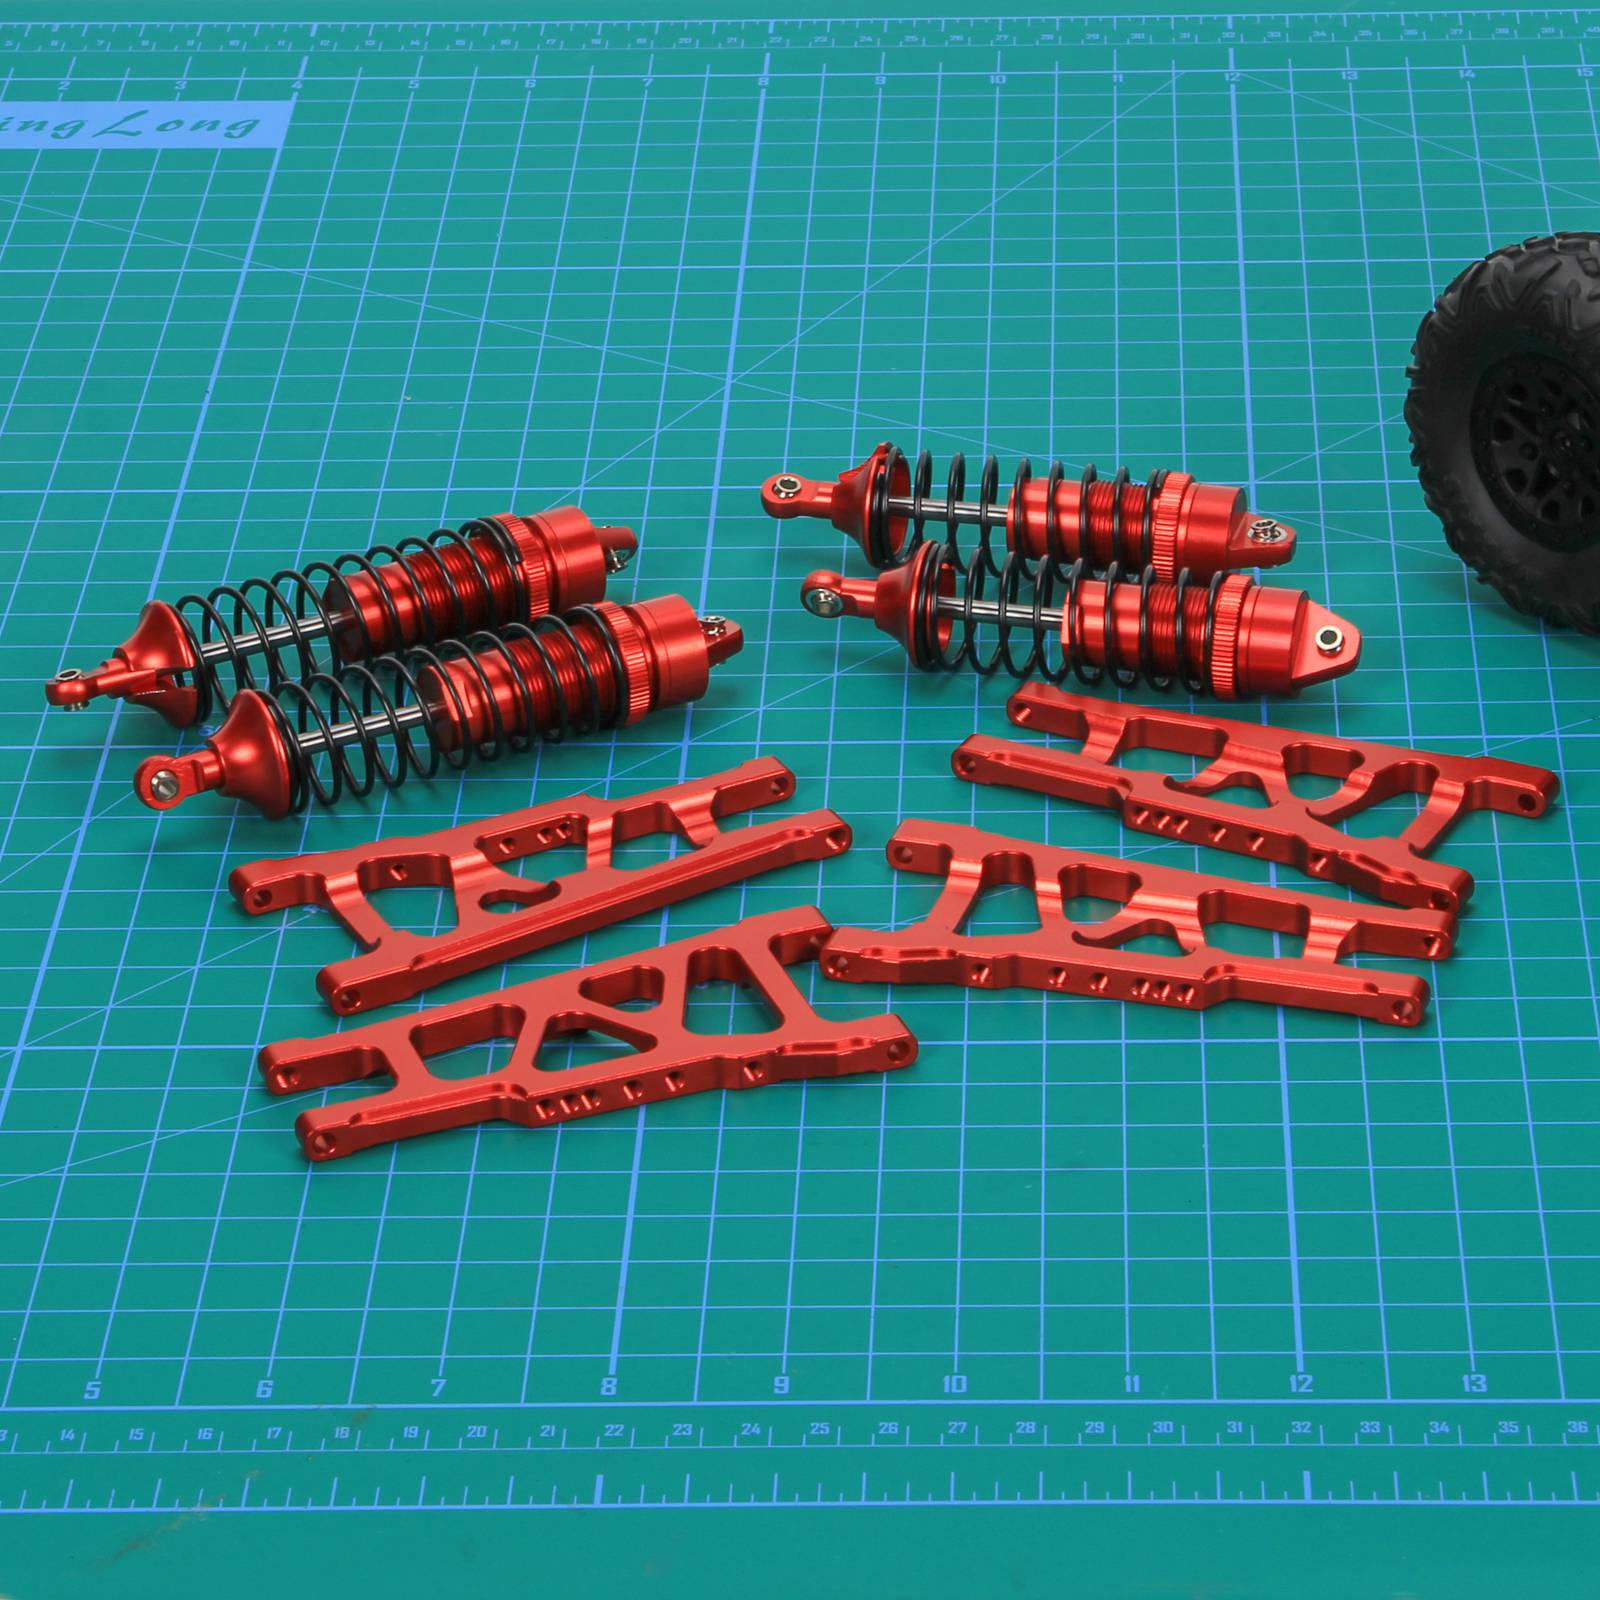 RCAWD TRAXXAS SLASH RCAWD Aluminum Suspension Set and Full Metal Shock Absorber for 1/10 Traxxas Slash 4x4